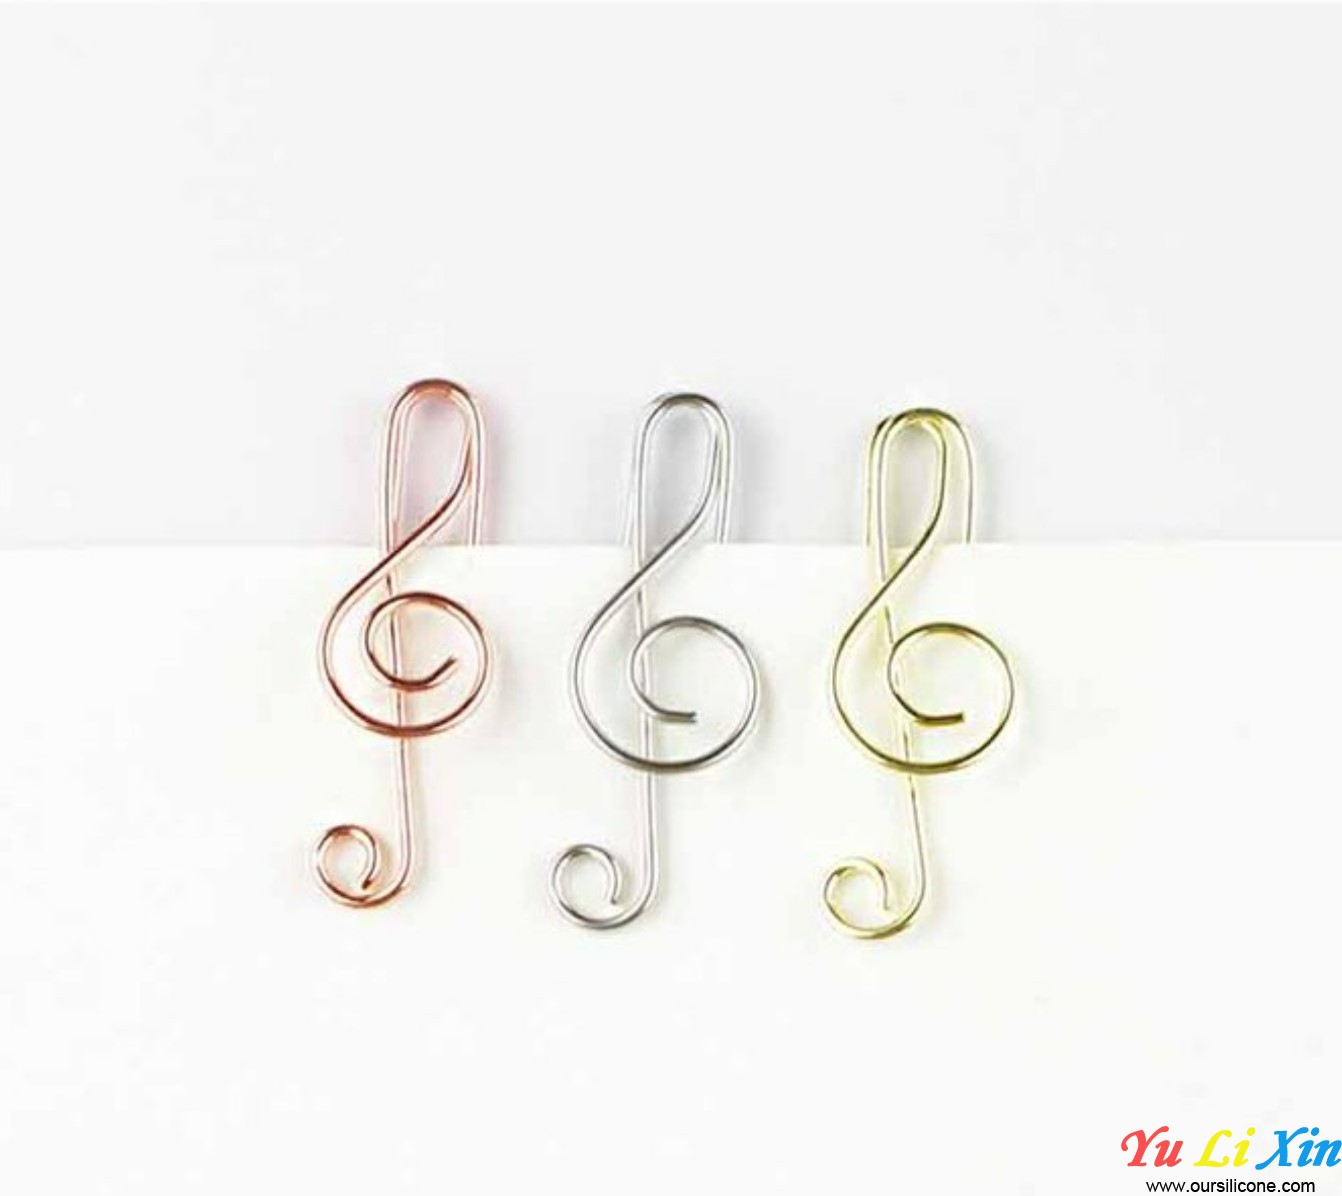 Artistical Musical Note Shaped Bookmark Clip